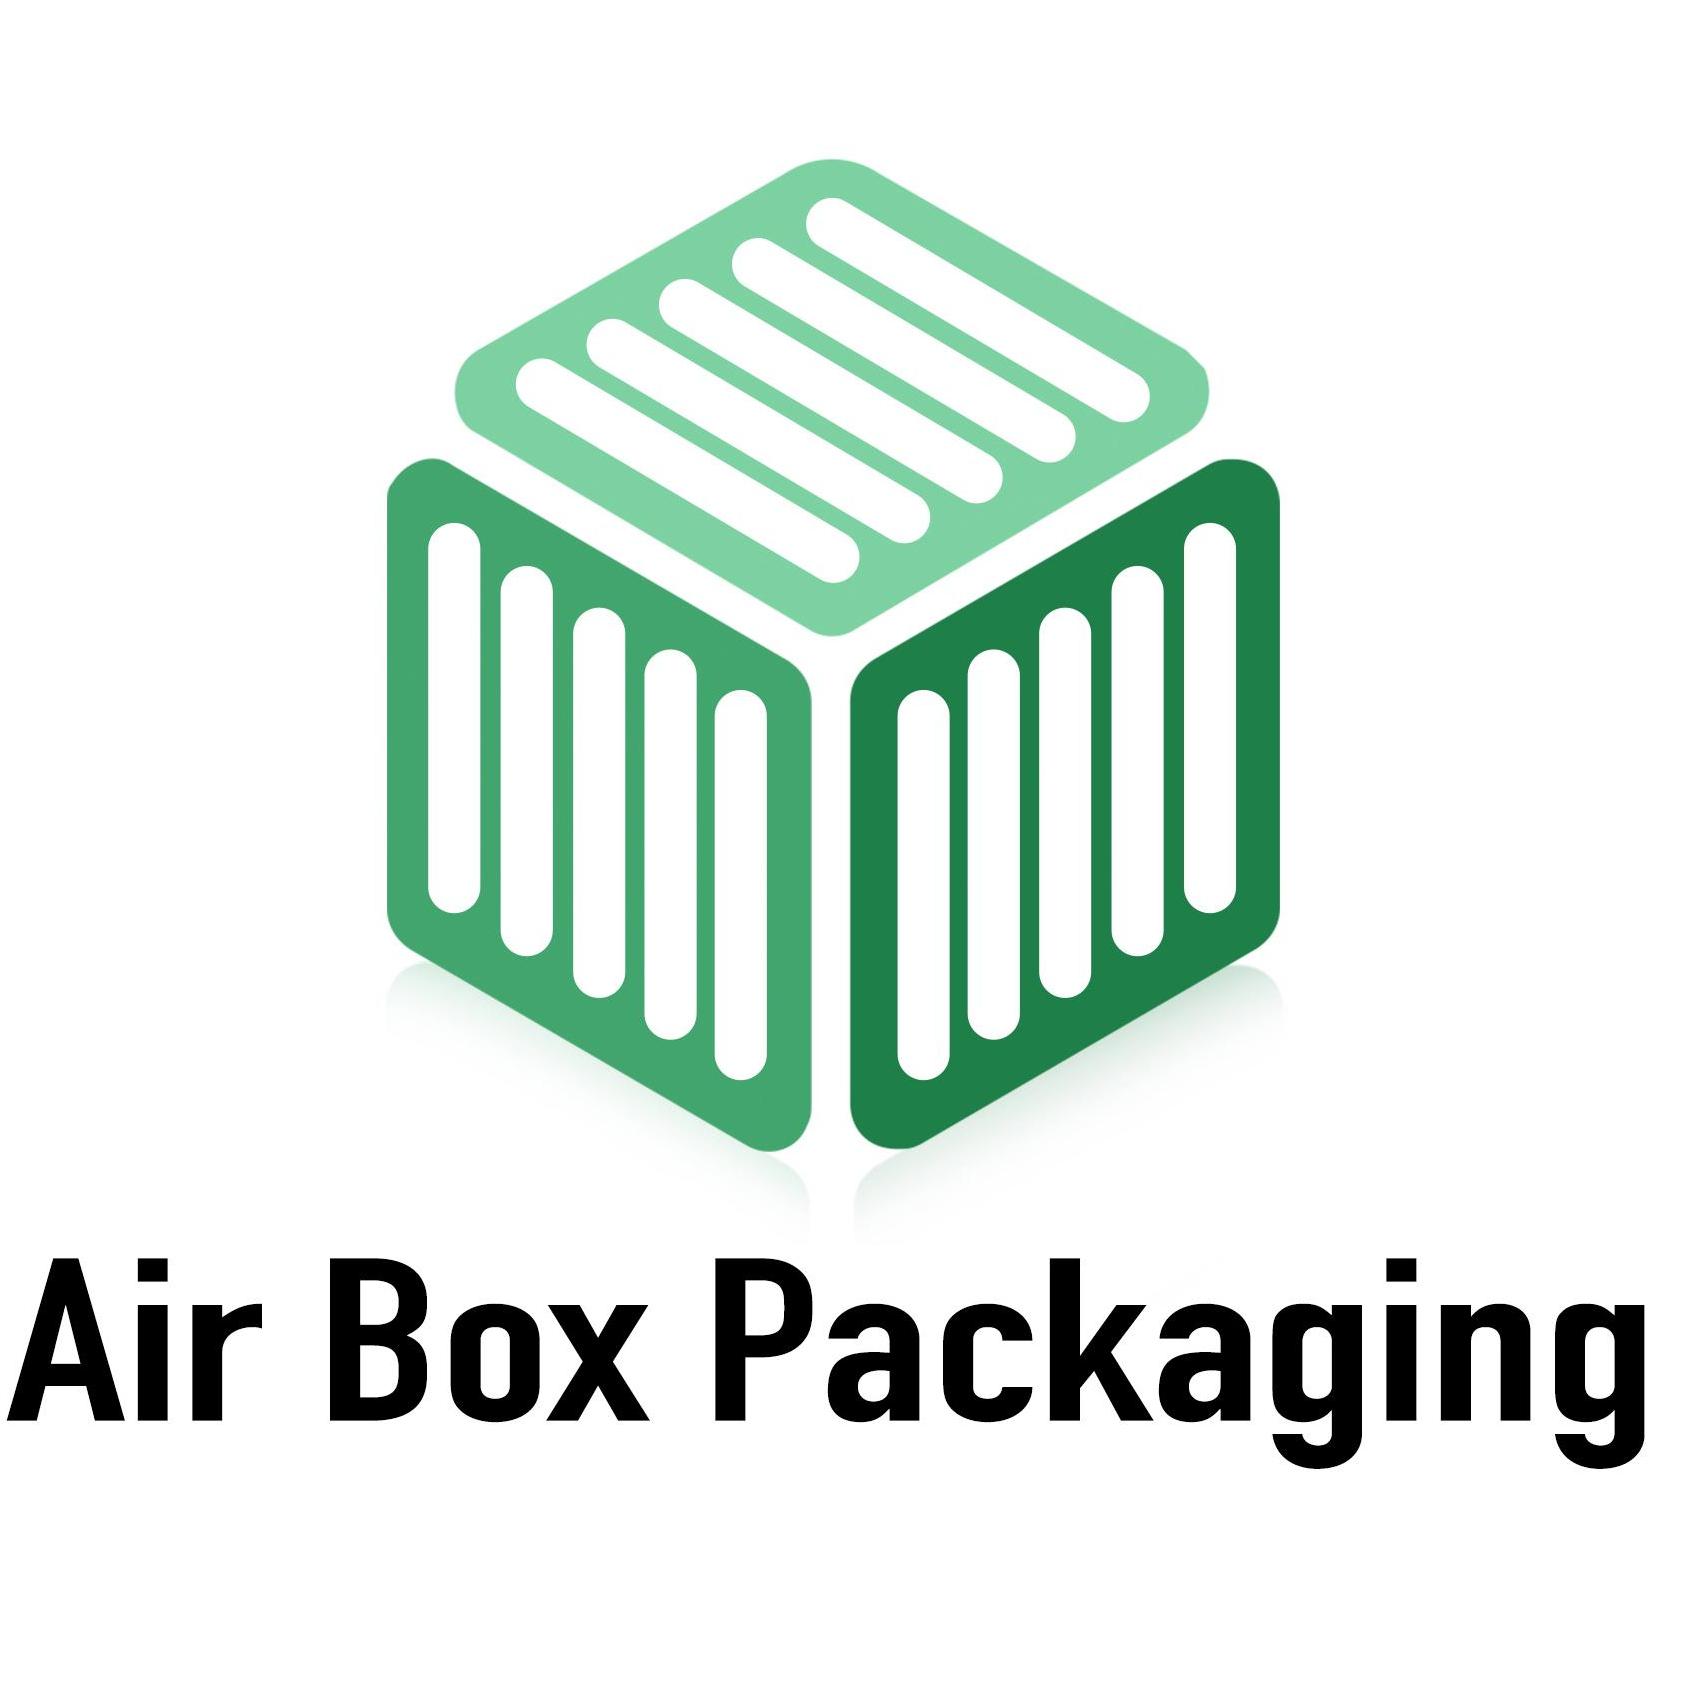 Airbox Packaging